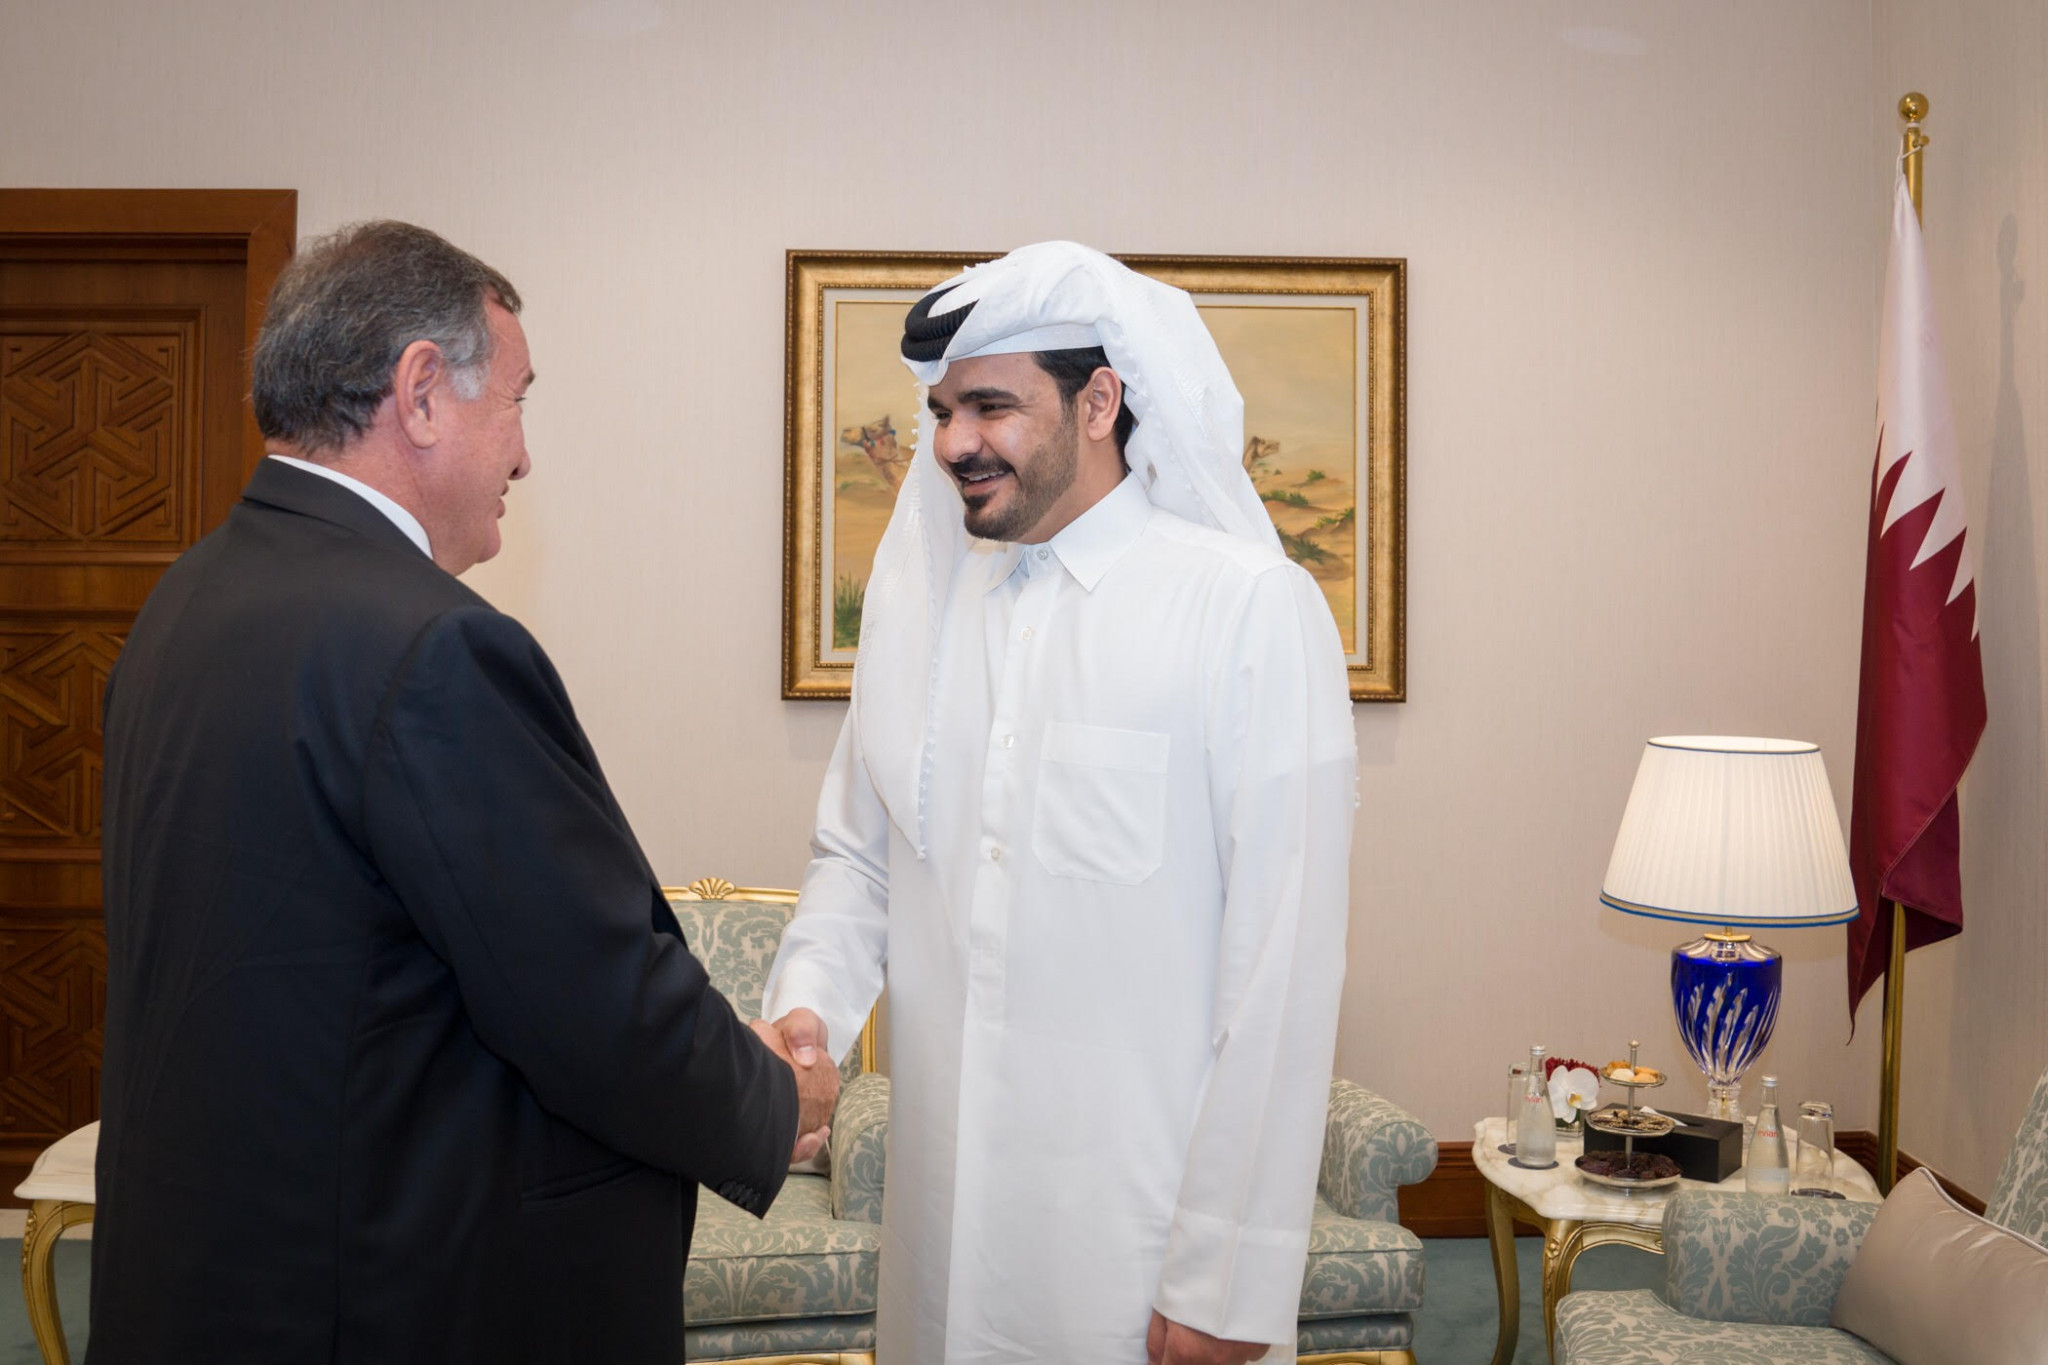 Hellenic Olympic Committee President Spyros Capralos met Sheikh Joaan bin Hamad Al-Thani, his counterpart at the Qatar Olympic Committee ©HOC